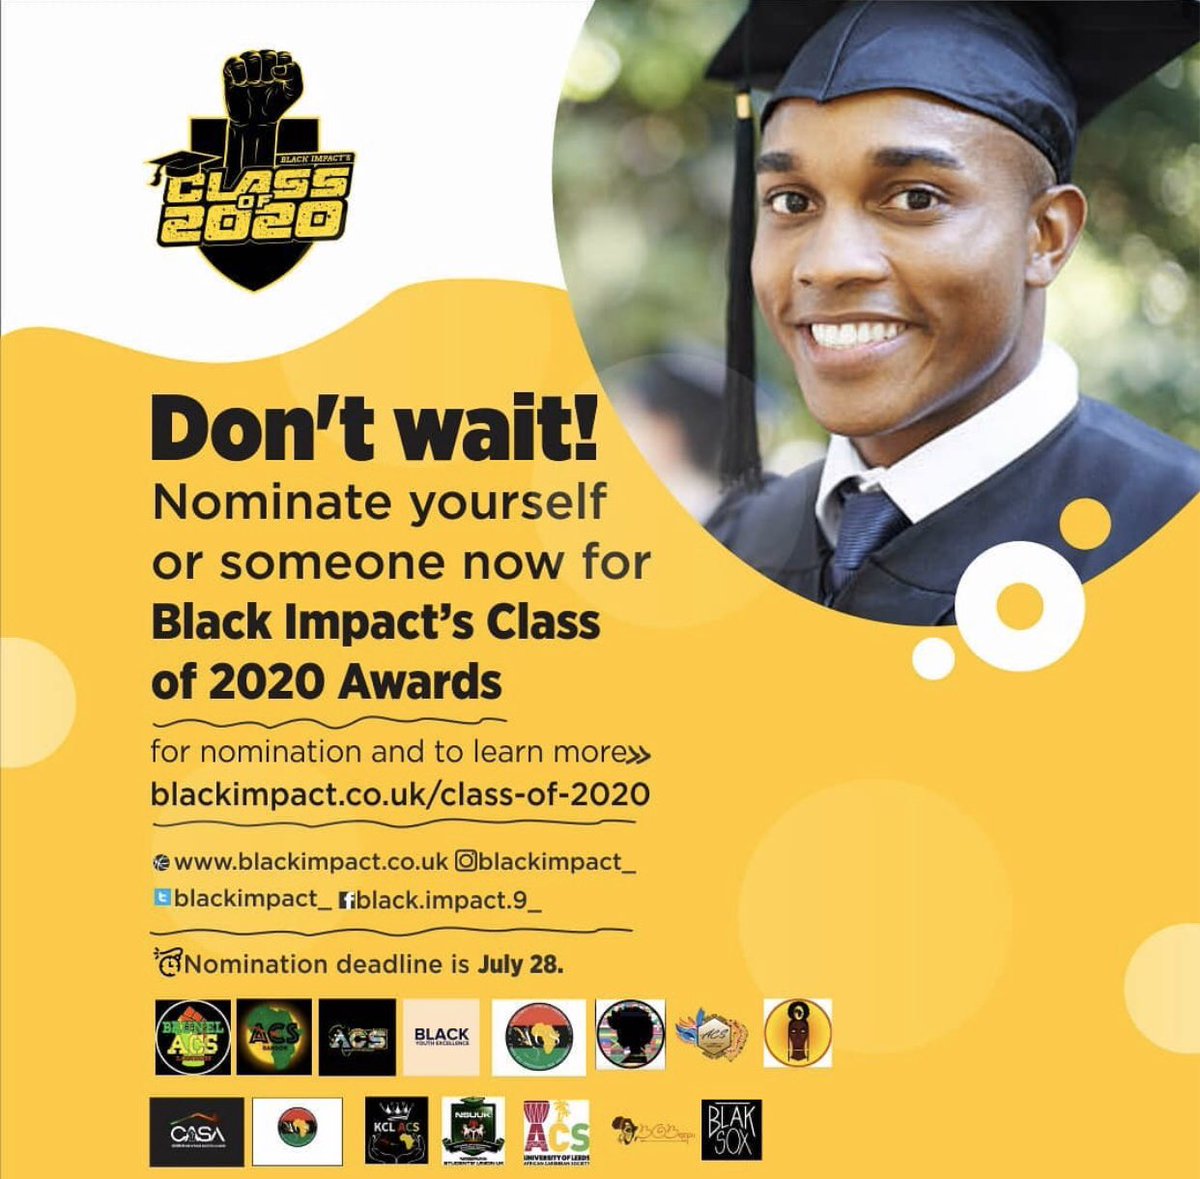 AWARD NOMINATIONS: CLASS OF 2020 BLACK GRADUATES. Nominations are open @BlackImpact_ National graduate award ceremony. Anyone can nominate - open to first degree, masters, postgraduate and Phd graduates . Deadline 28 July 2020. blackimpact.co.uk/class-of-2020/